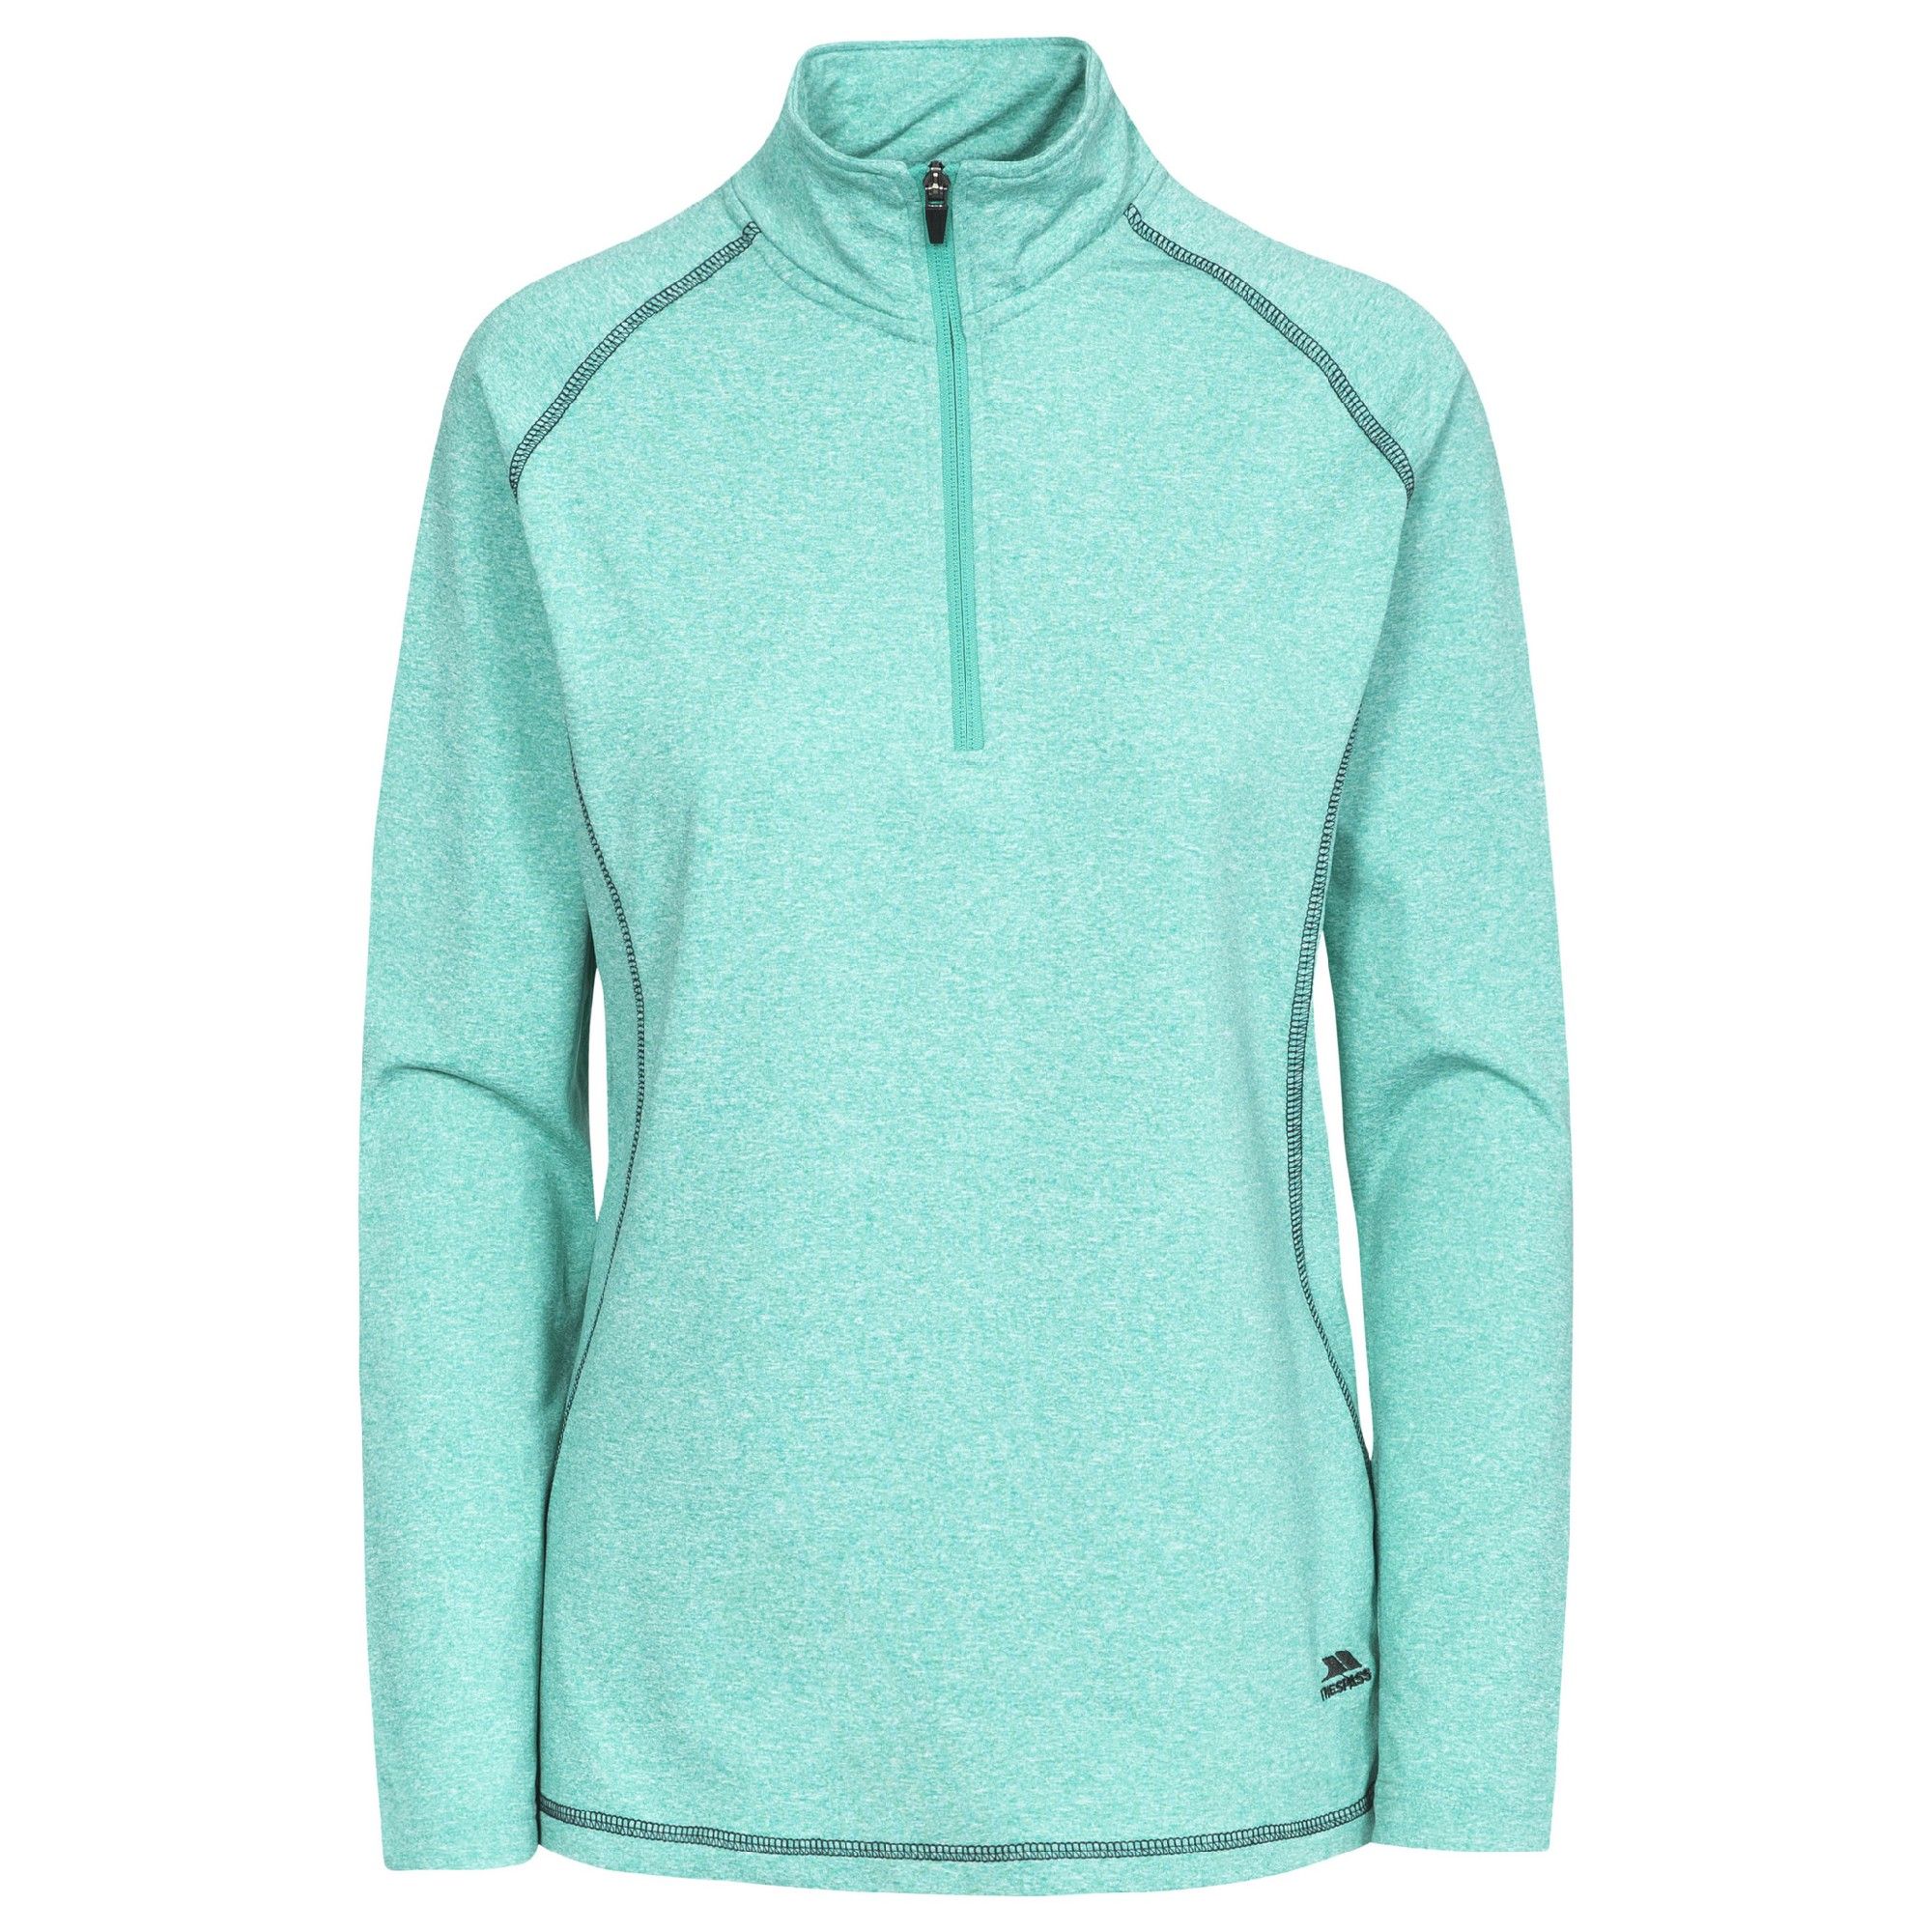 Long sleeved top with melange and brushed back. 1/2 zip neck. Flat cuff. Quick dry. 225gsm. 95% polyester, 5% elastane. Trespass Womens Chest Sizing (approx): XS/8 - 32in/81cm, S/10 - 34in/86cm, M/12 - 36in/91.4cm, L/14 - 38in/96.5cm, XL/16 - 40in/101.5cm, XXL/18 - 42in/106.5cm.